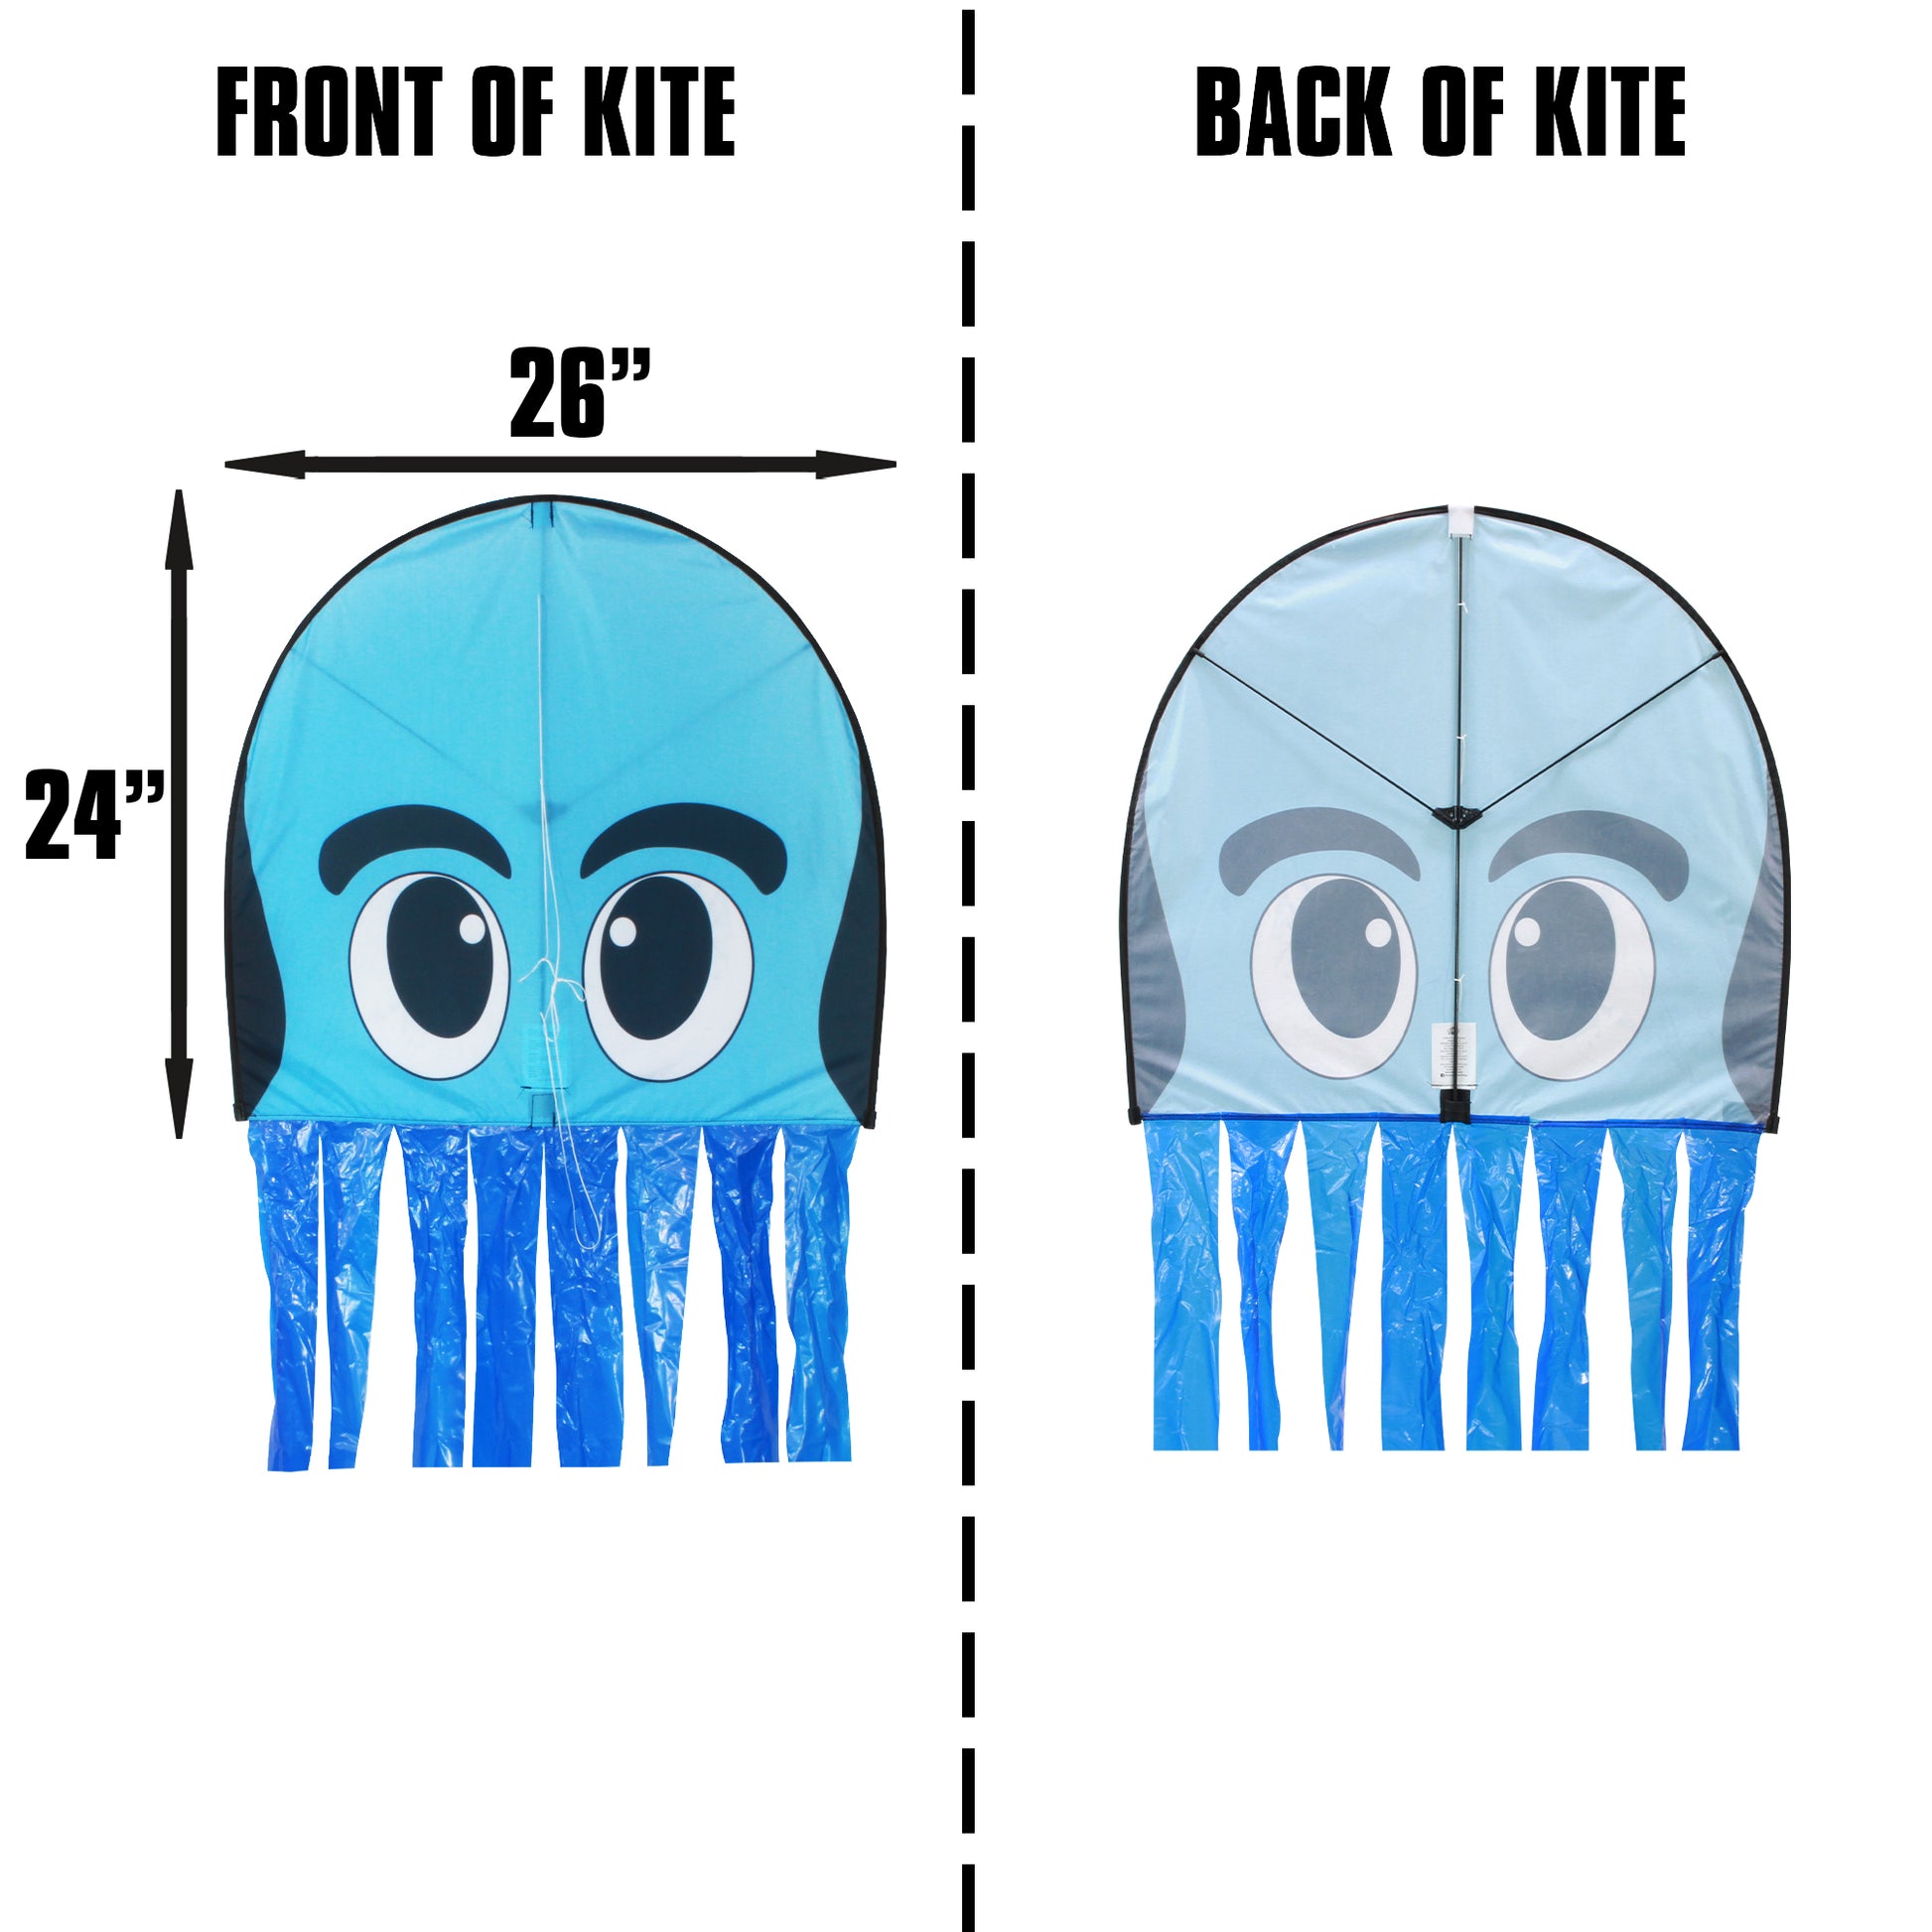 X Kites StratoKite Octopus Nylon Figure Kite Product Dimensions 26 inches wide by 24 inches long head with long tails